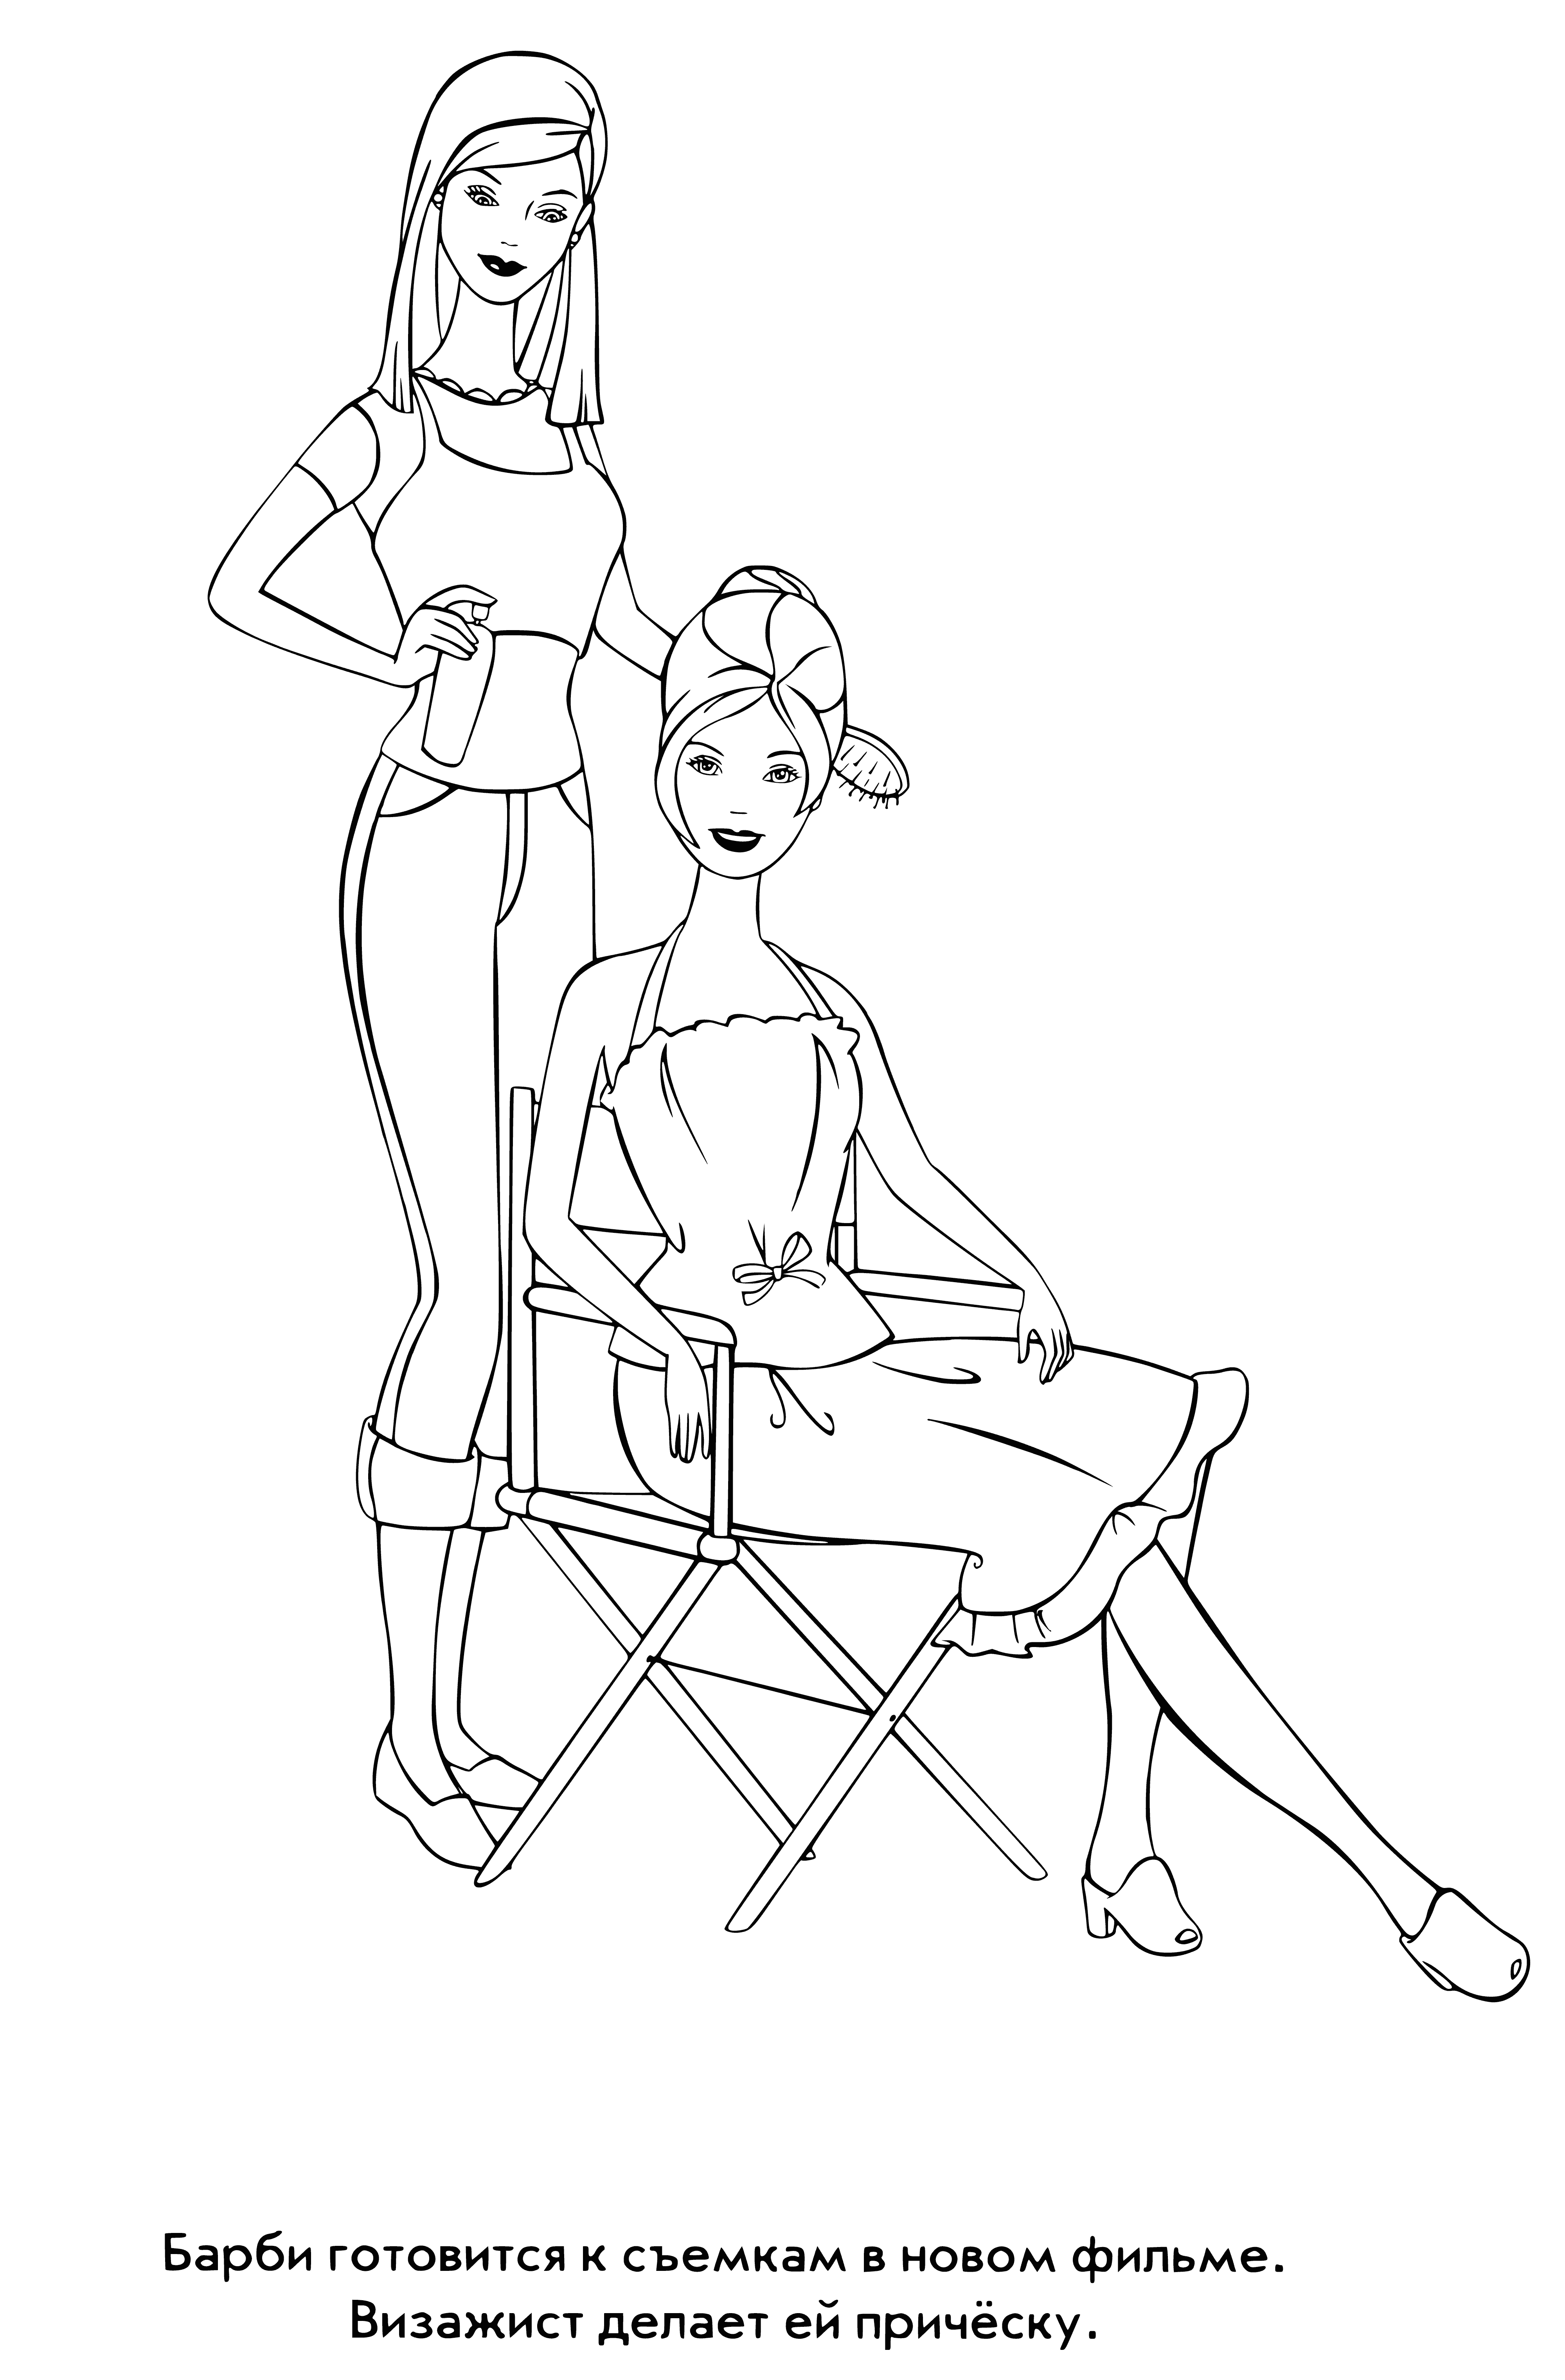 Barbie at the makeup artist coloring page